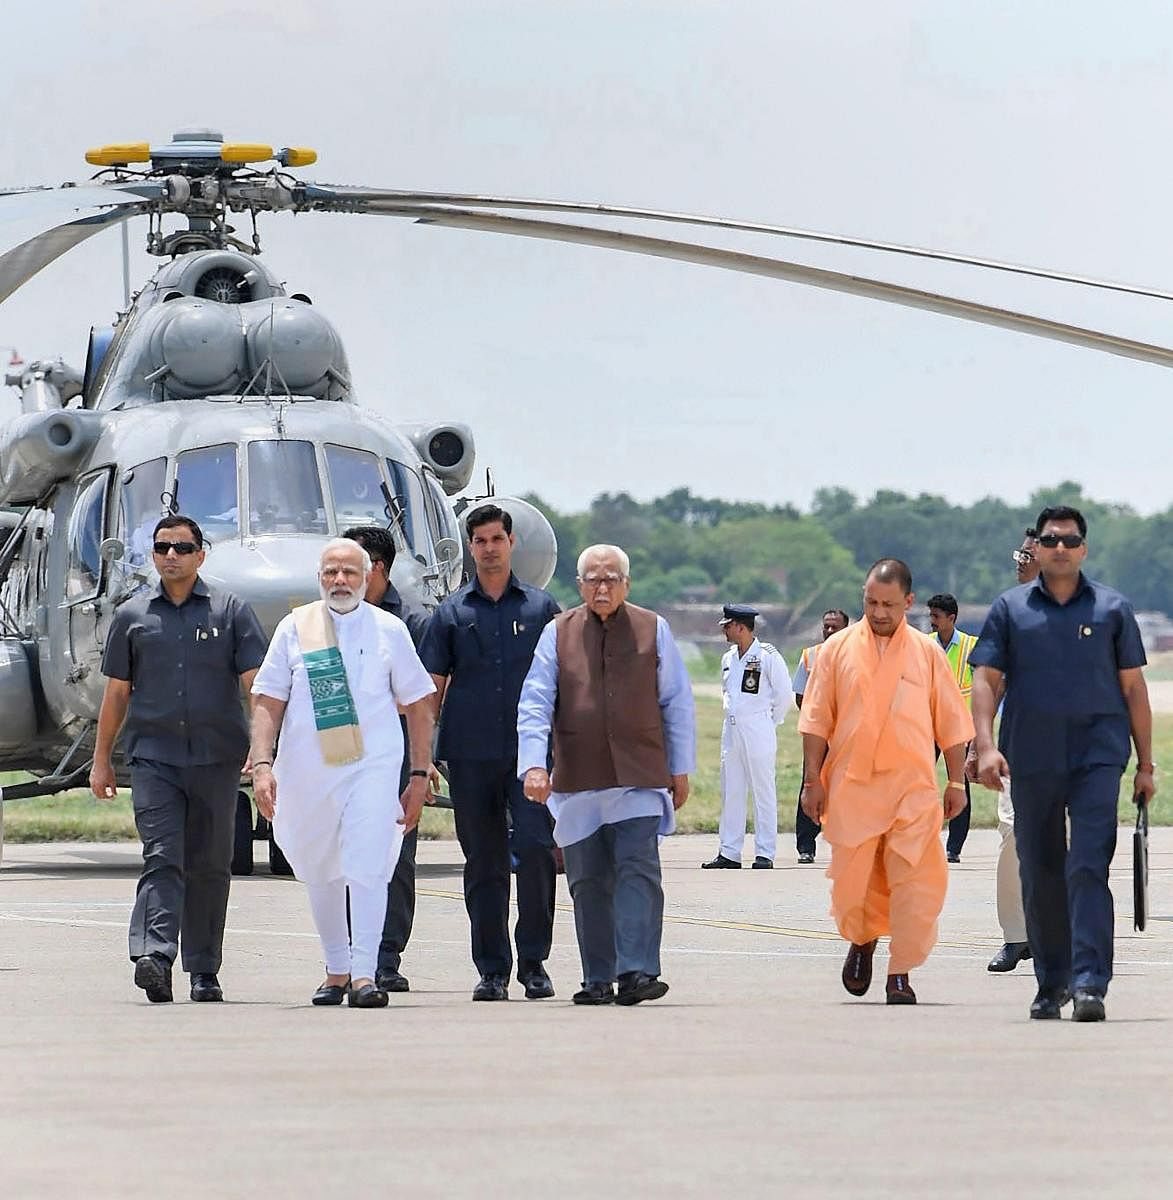 Prime Minister Narendra Modi leaves from Varanasi after inaugurating the Bansagar canal project and laying the foundation stone of Mirzapur Medical college on Sunday, July 15, 2018. Uttar Pradesh Governor Ram Naik and Chief Minister Yogi Adityanath are also seen. (PIB Photo via PTI)